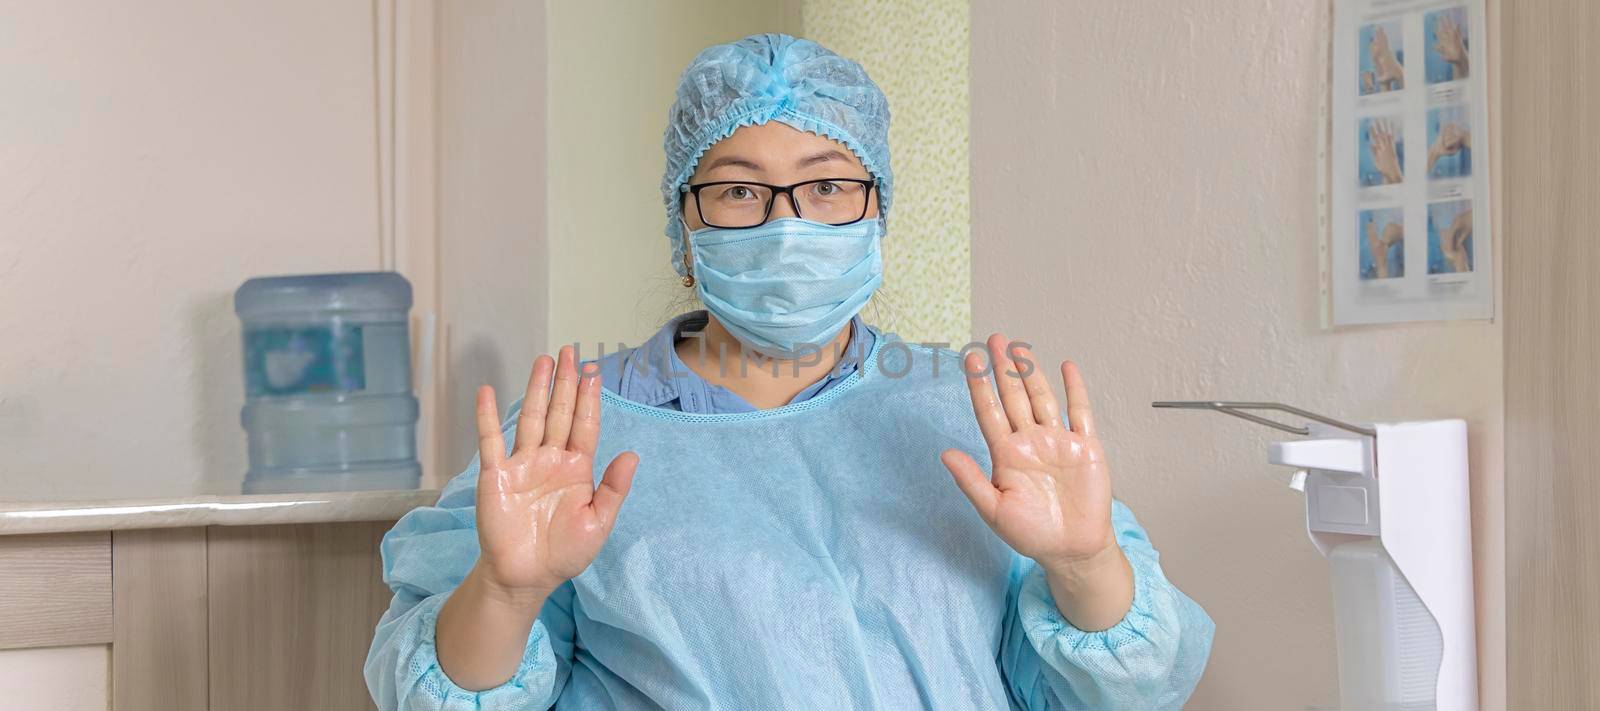 banner with medical worker in a disposable medical suit, a medical cap and a mask with glasses, shows the treated hands with a disinfectant solution next to the elbow dispenser. by Leoschka